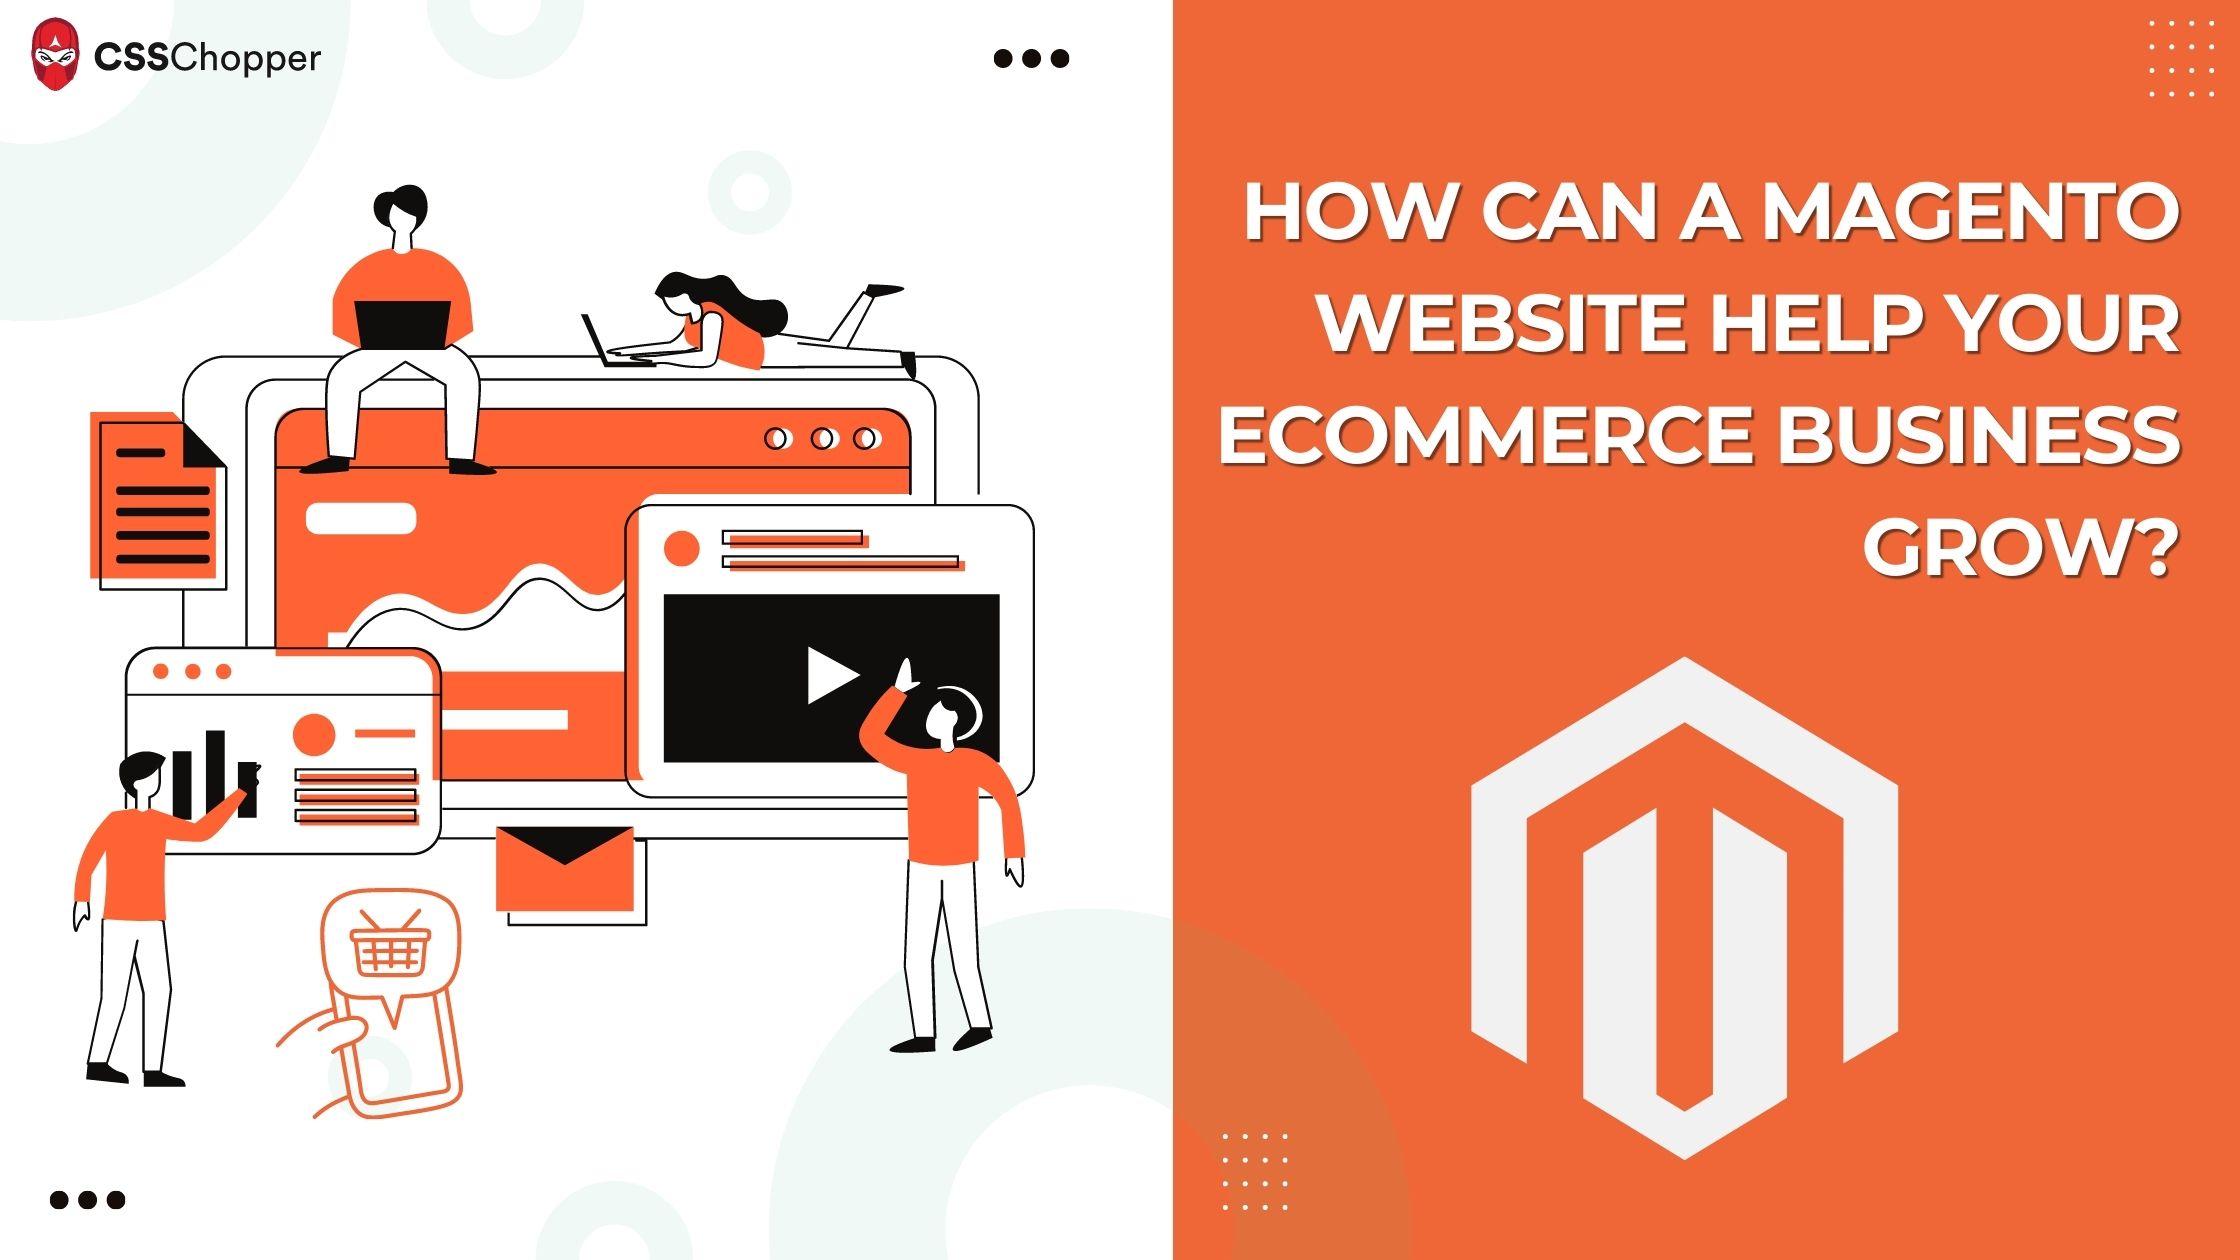 How Can A Magento Website Help Your eCommerce Business Grow?